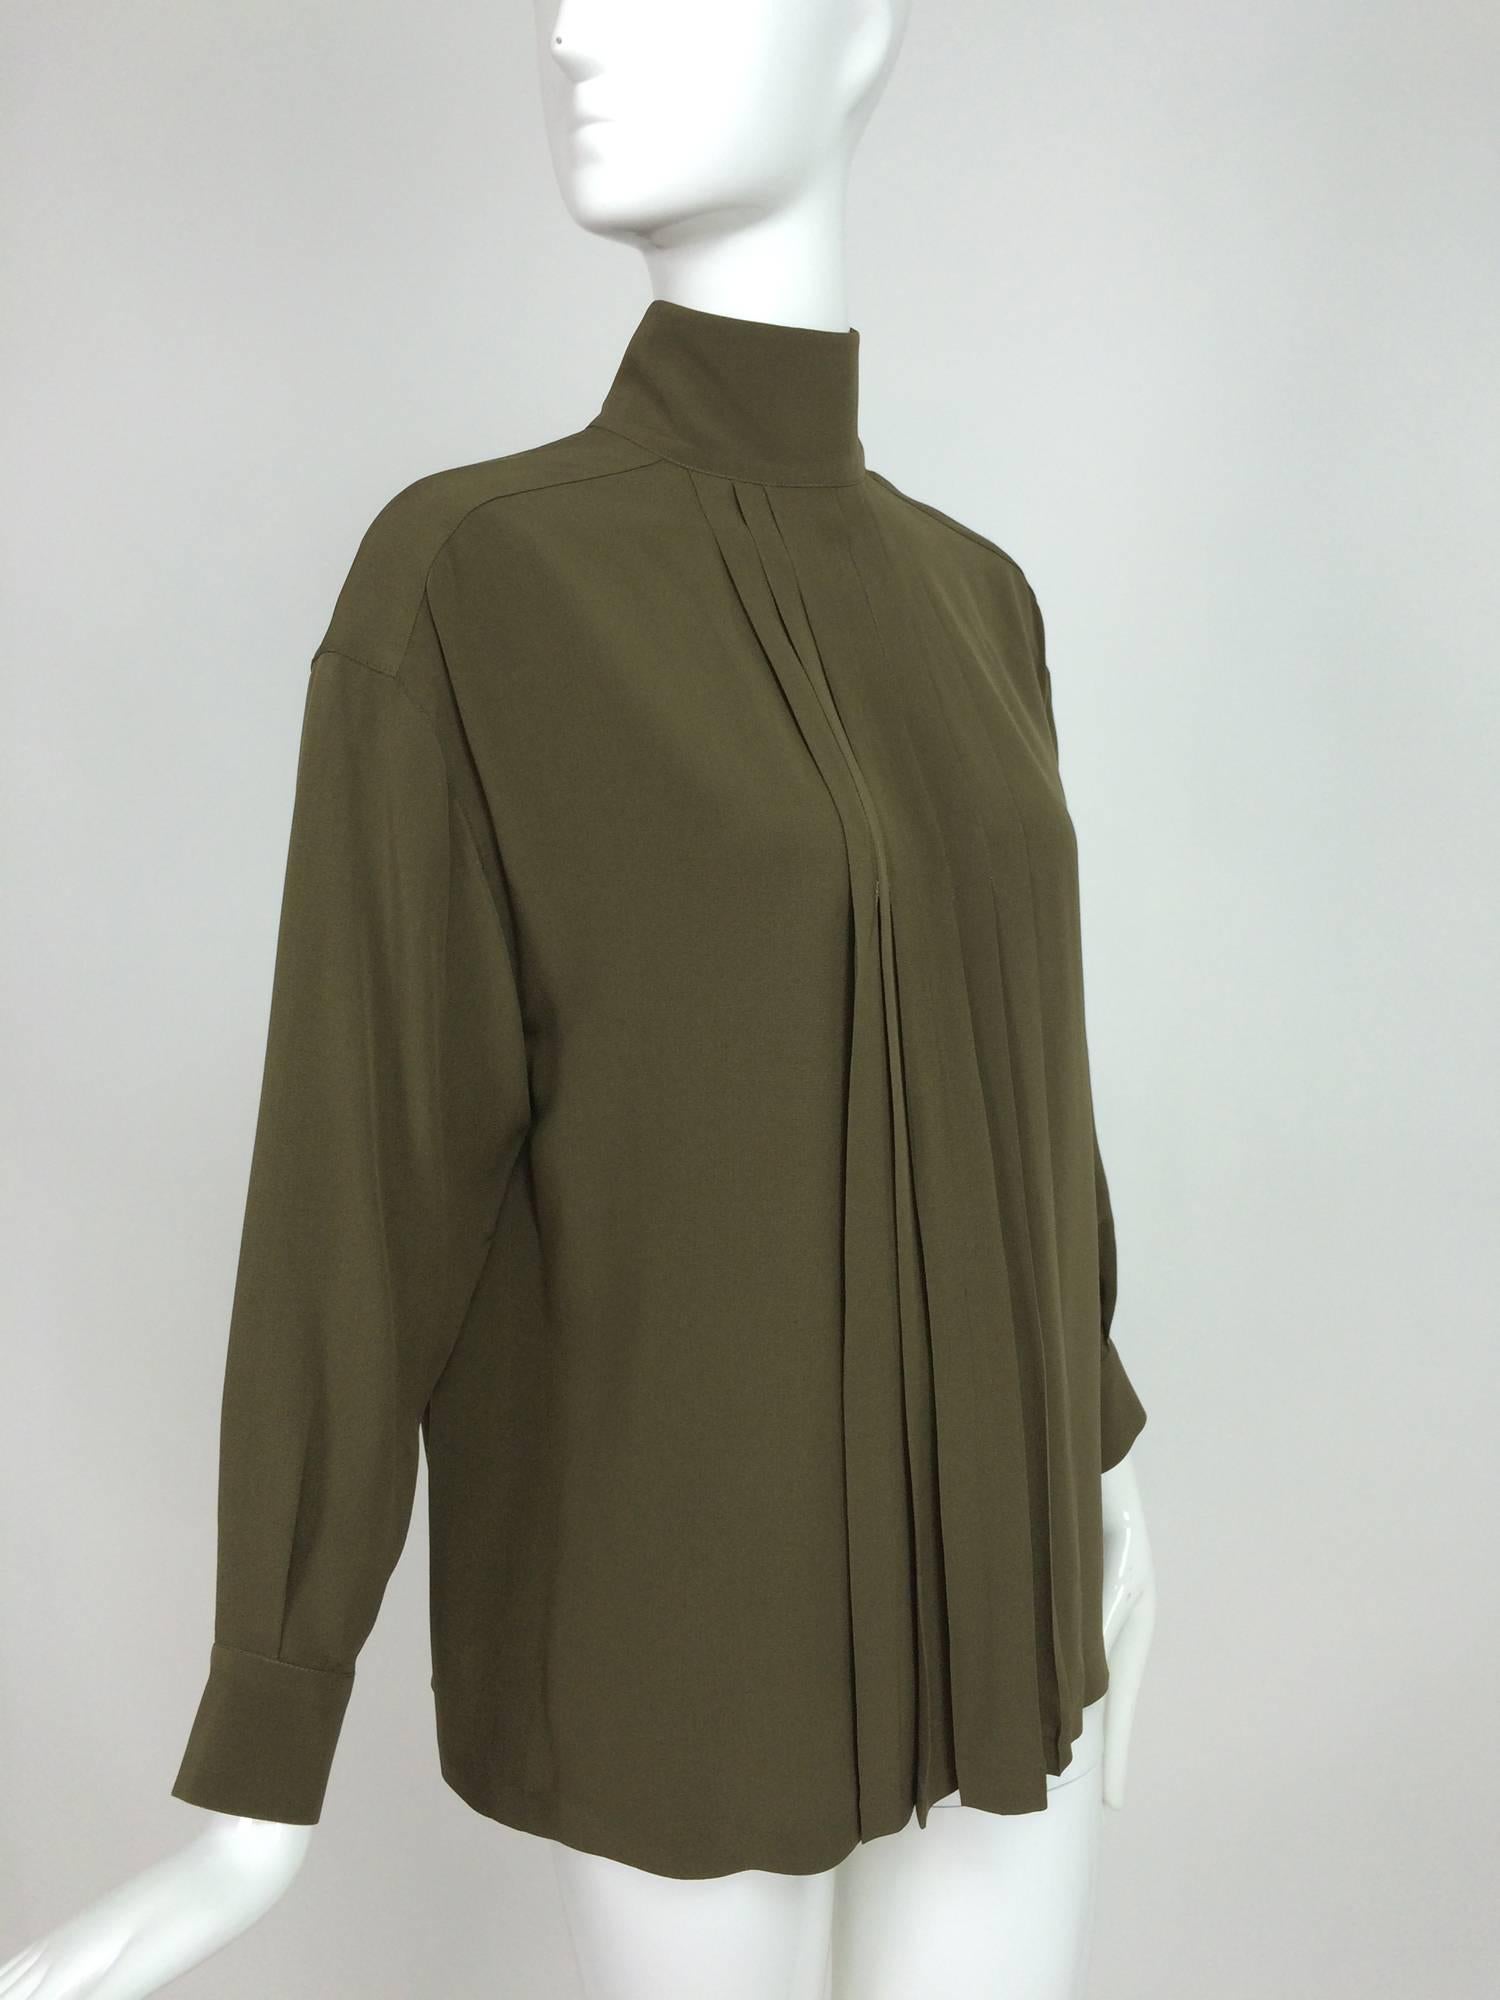 Chanel moss green silk crepe button back blouse 38...Rich moss/olive green silk crepe blouse with open pleats at center front and back...Stand up collar, long sleeves with gold Chanel button cuffs, blouse closes at the back with gold Chanel